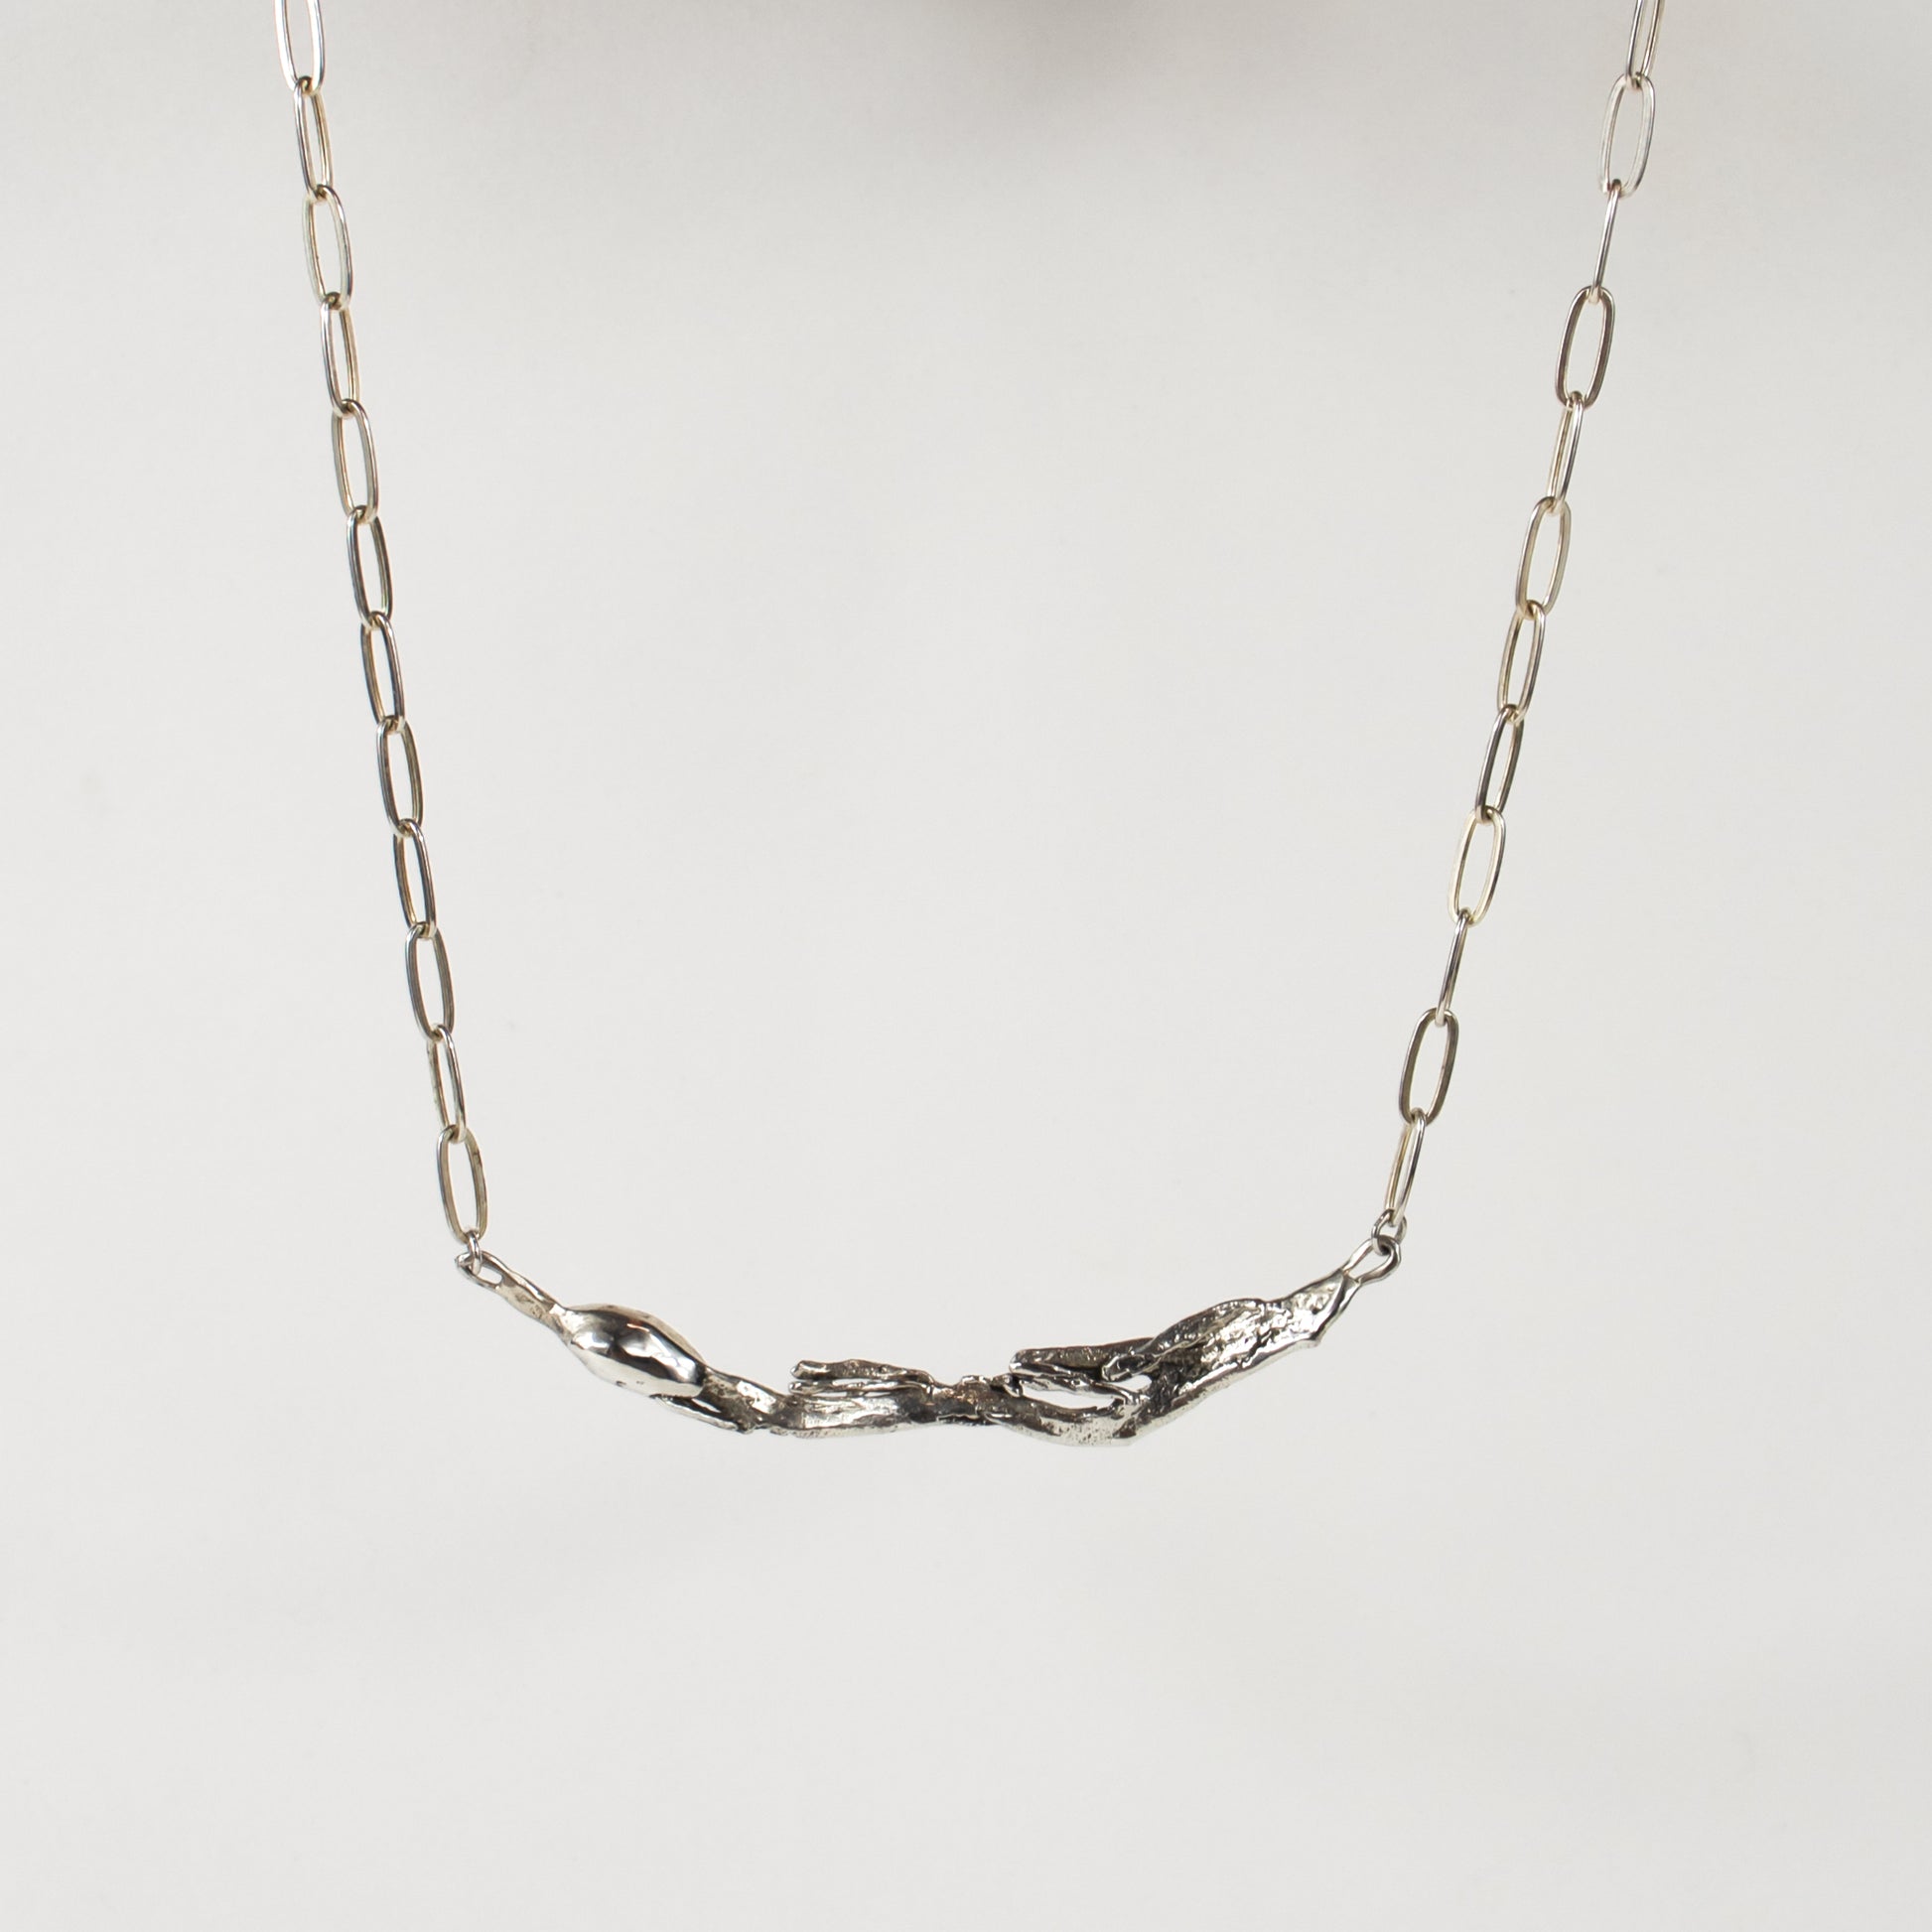 Reclaimed sterling silver 3 inch seaweed feather on sterling paperclip chain adjustable 16-18 inches handmade and finished in our Catskills store-studio by Icelandic designer, Johanna Methusalemsdottir.